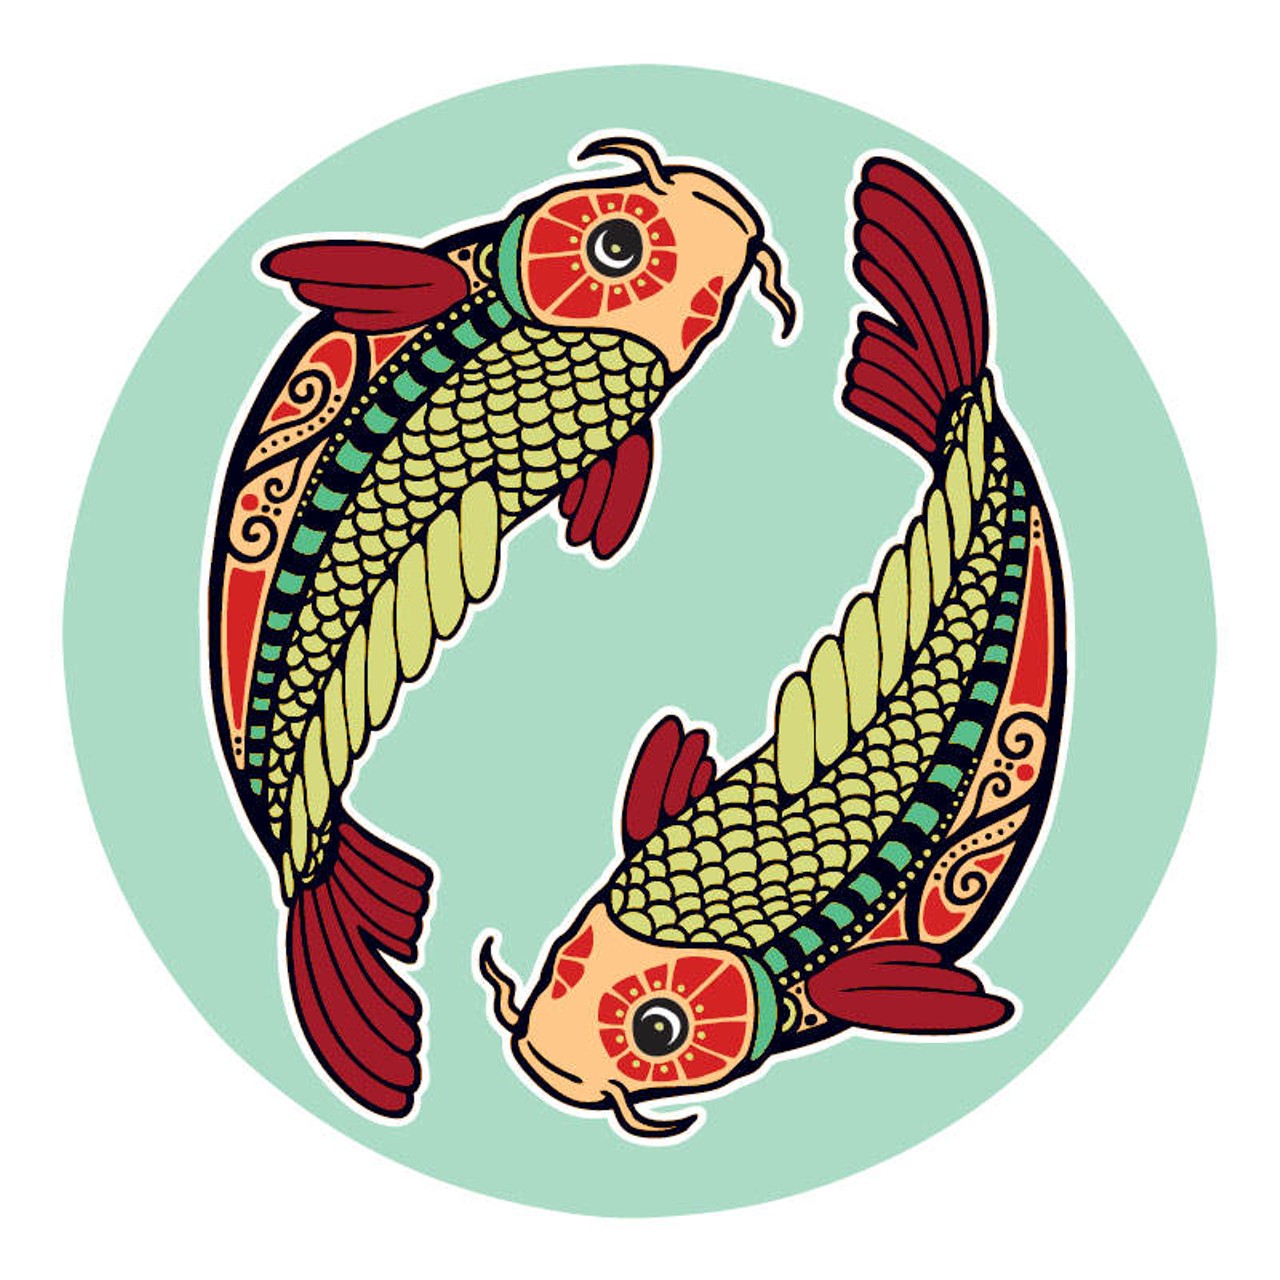 PISCES (Feb. 21-March 20): 
You have come a long way. The business of finding yourself has taken you down a million different roads. As past experience wells up to show you where things are at, you&#146;re starting to wonder if it&#146;s time to go back. Reclaiming things that were meant to be left by the wayside may not be the best idea. On the other hand, there could be good reasons to get back in the saddle. The answer isn&#146;t the same for all of you. One thing is for sure &#151; your intuition has already informed you with the truth. Trust it and let that insight show you whether it&#146;s time to stay or go.